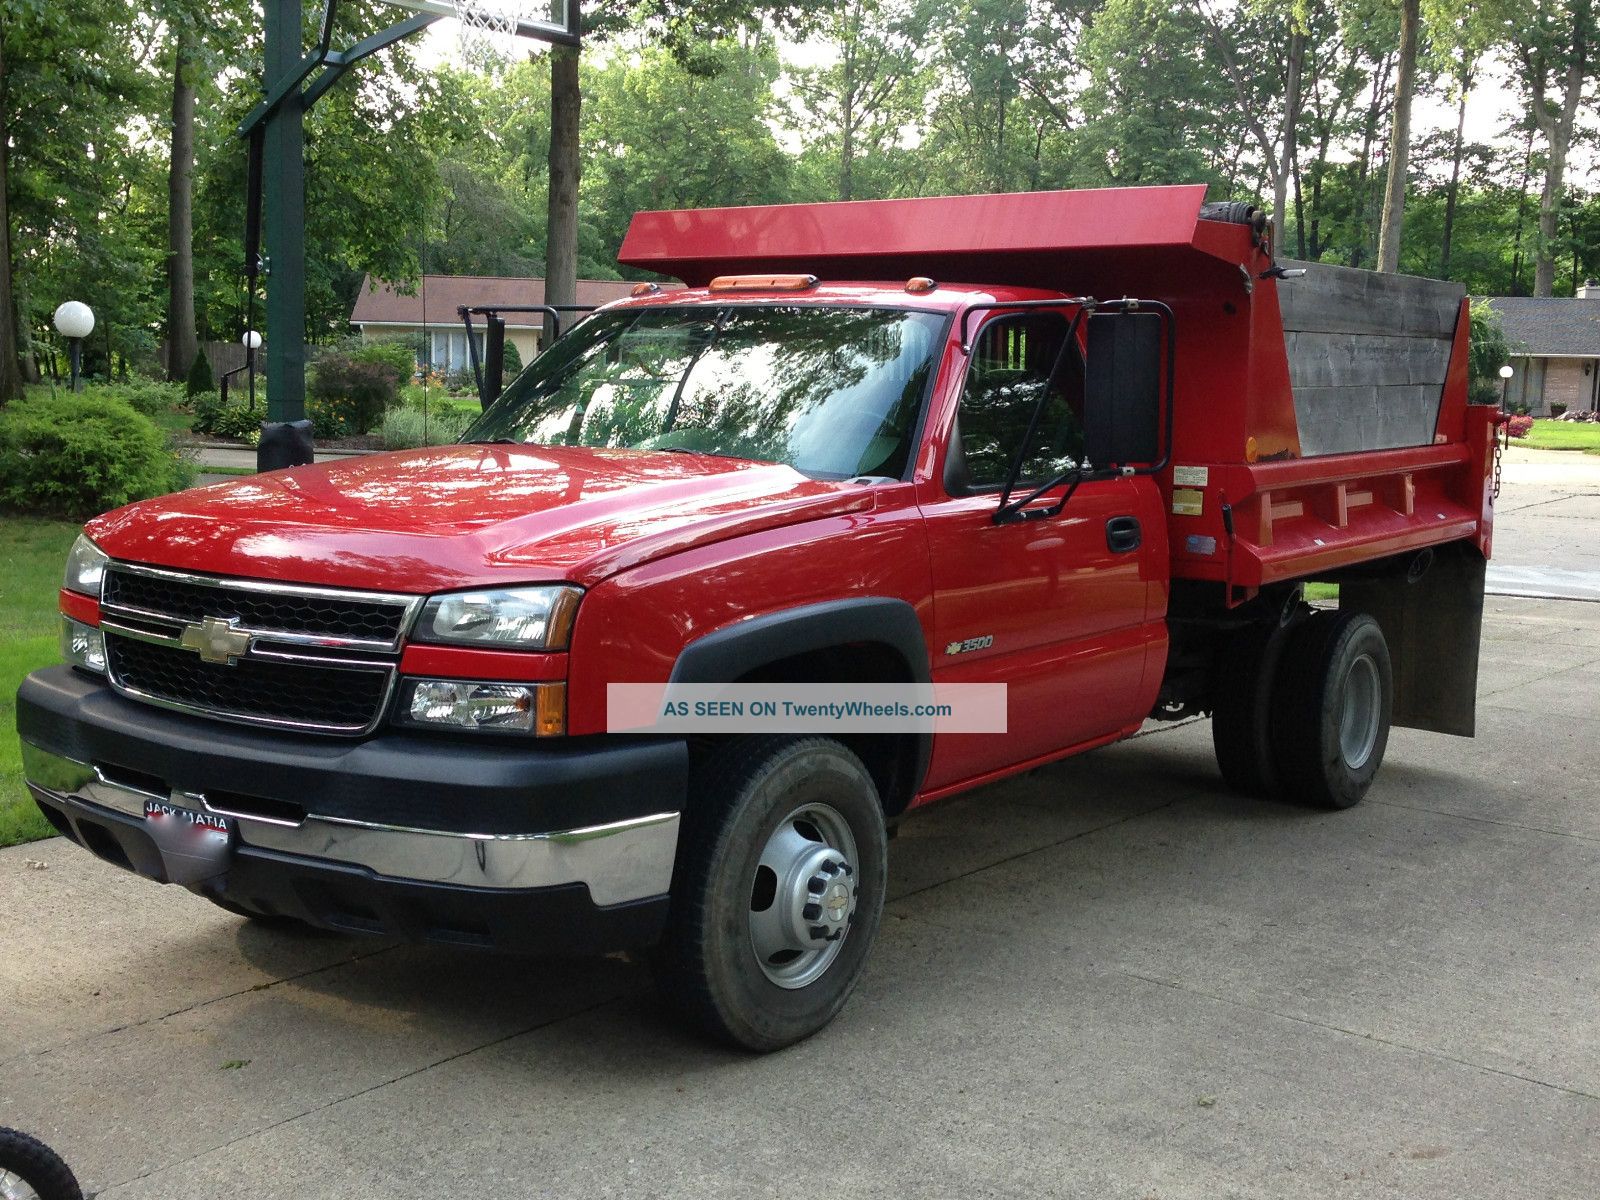 2006 Chevy 3500 Single Axle Dump Truck For Sale By Arthur Trovei And